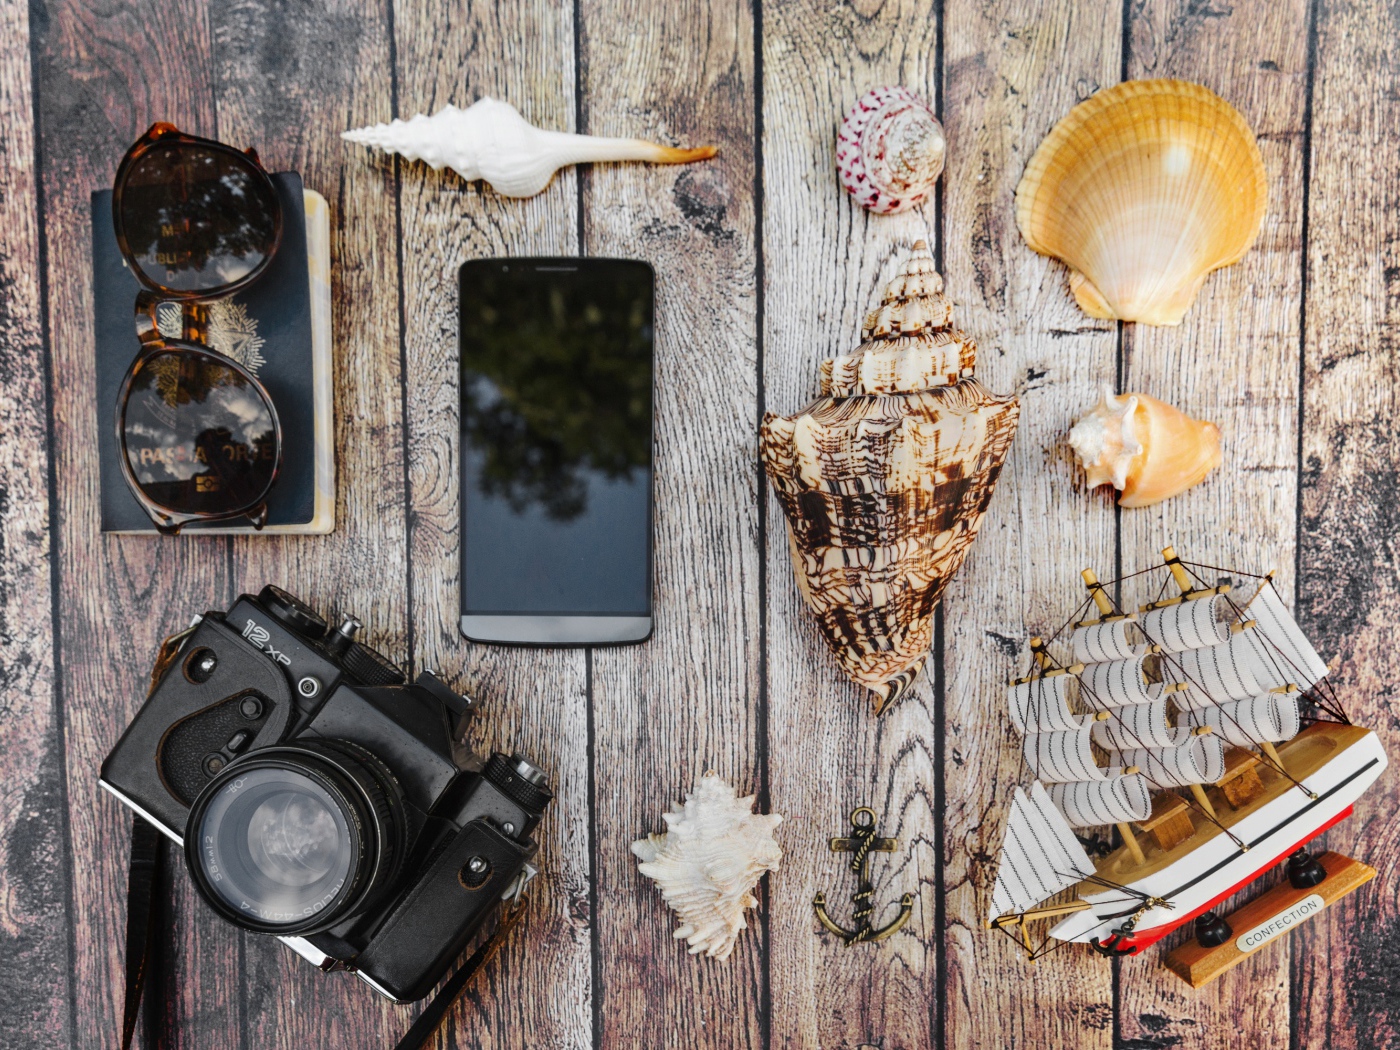 Camera, smartphone, shells, glasses and passport on the table